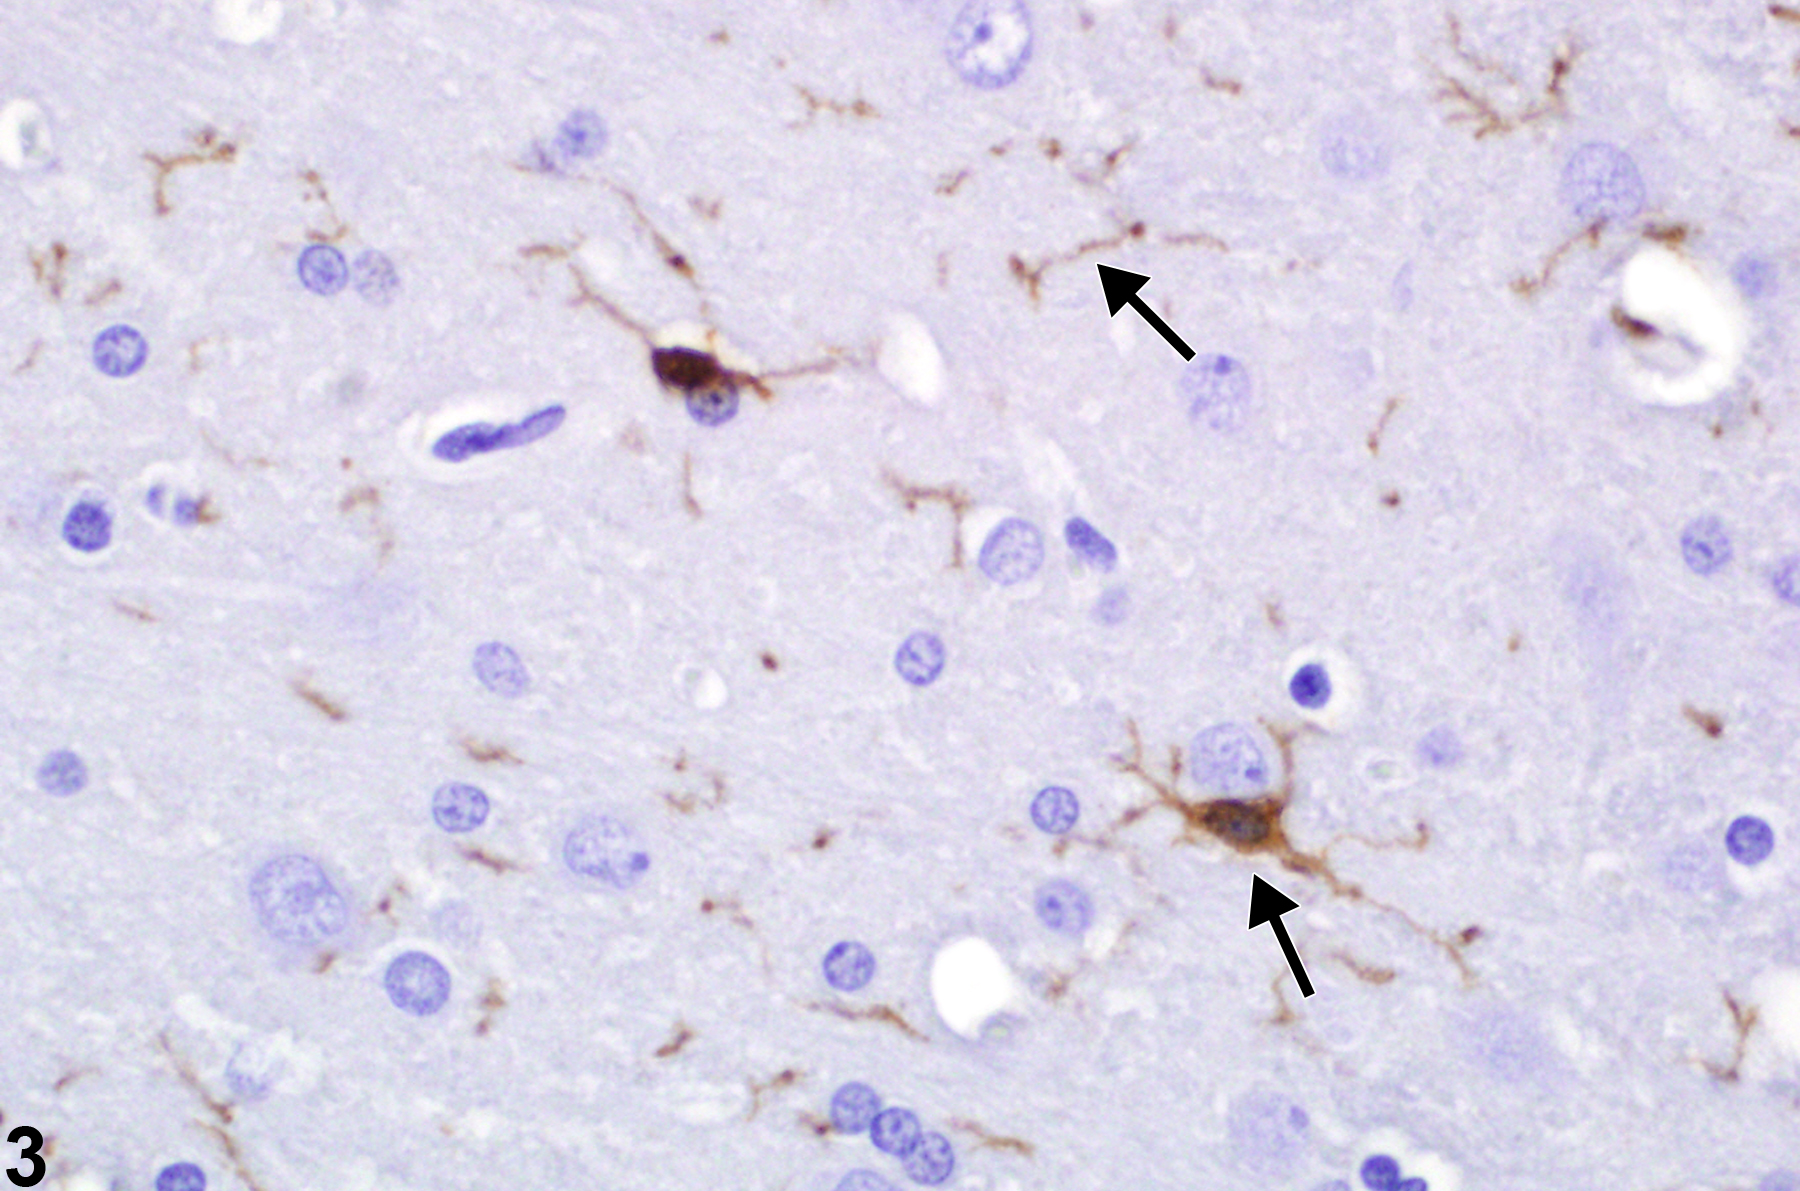 Image of microgliosis in the brain from an  F344/N rat